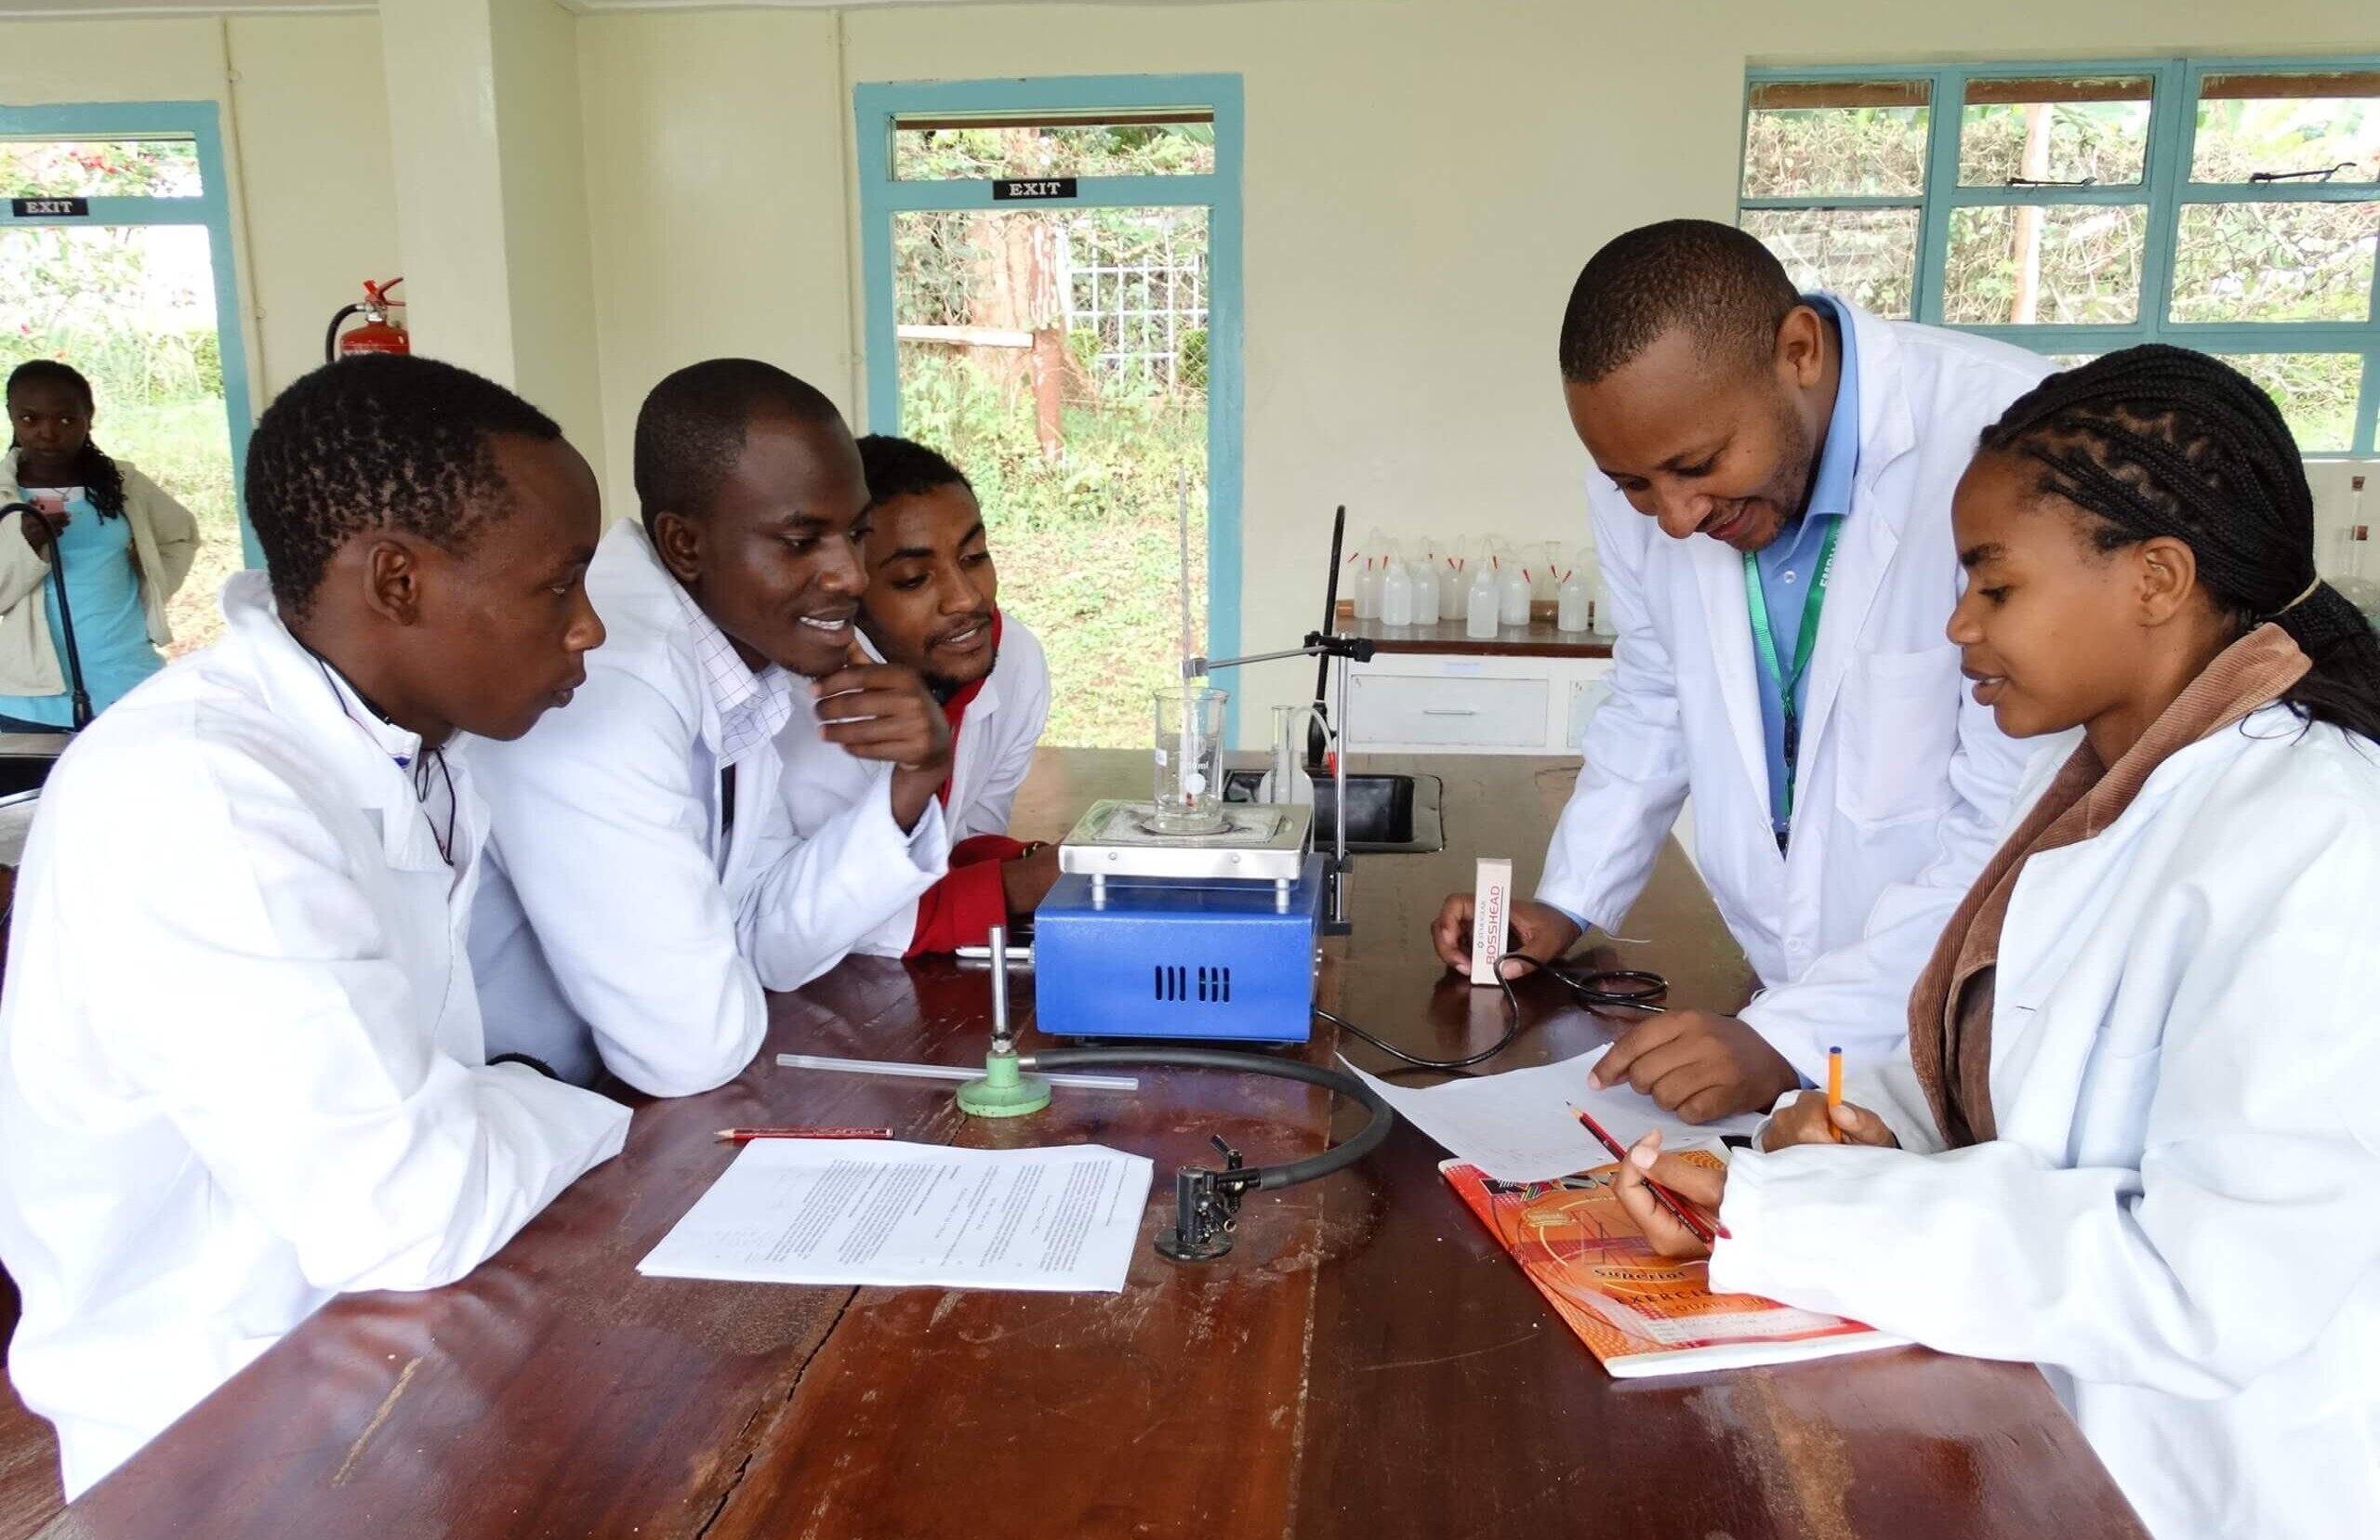 Professors and students in the lab at Embu University College